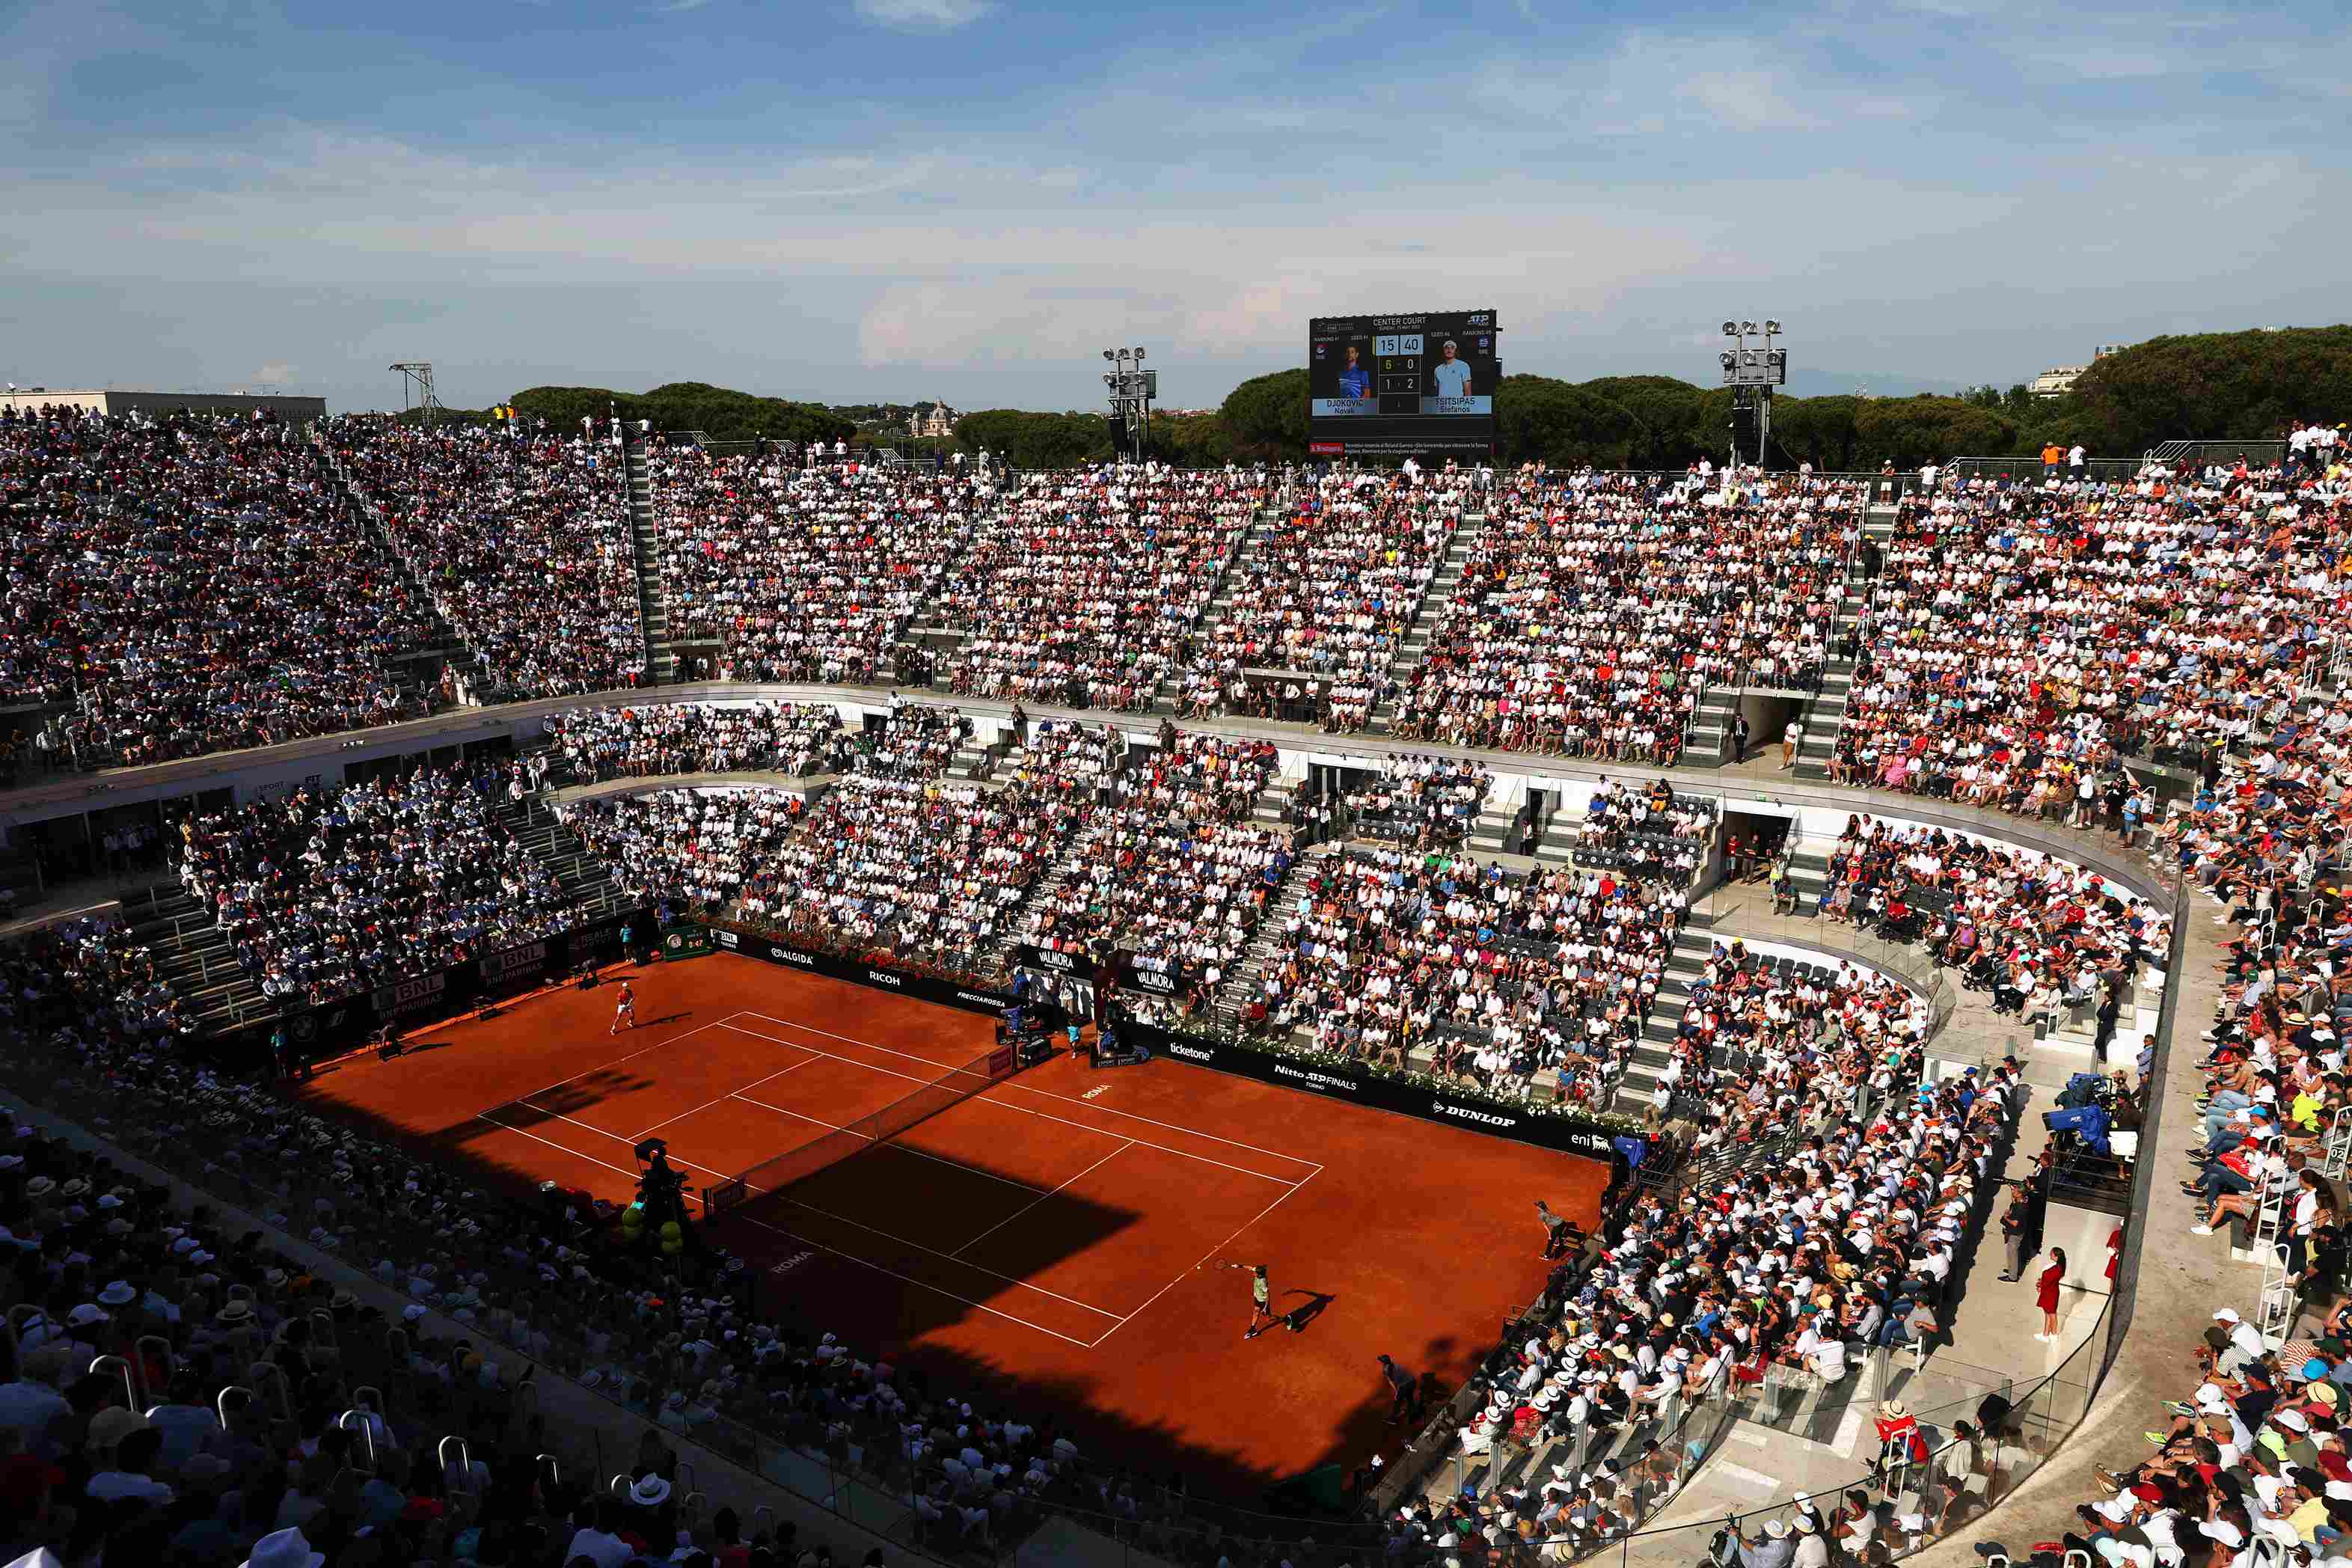 2023 Italian Open: Rome Draw Preview and Analysis - Tennis Connected